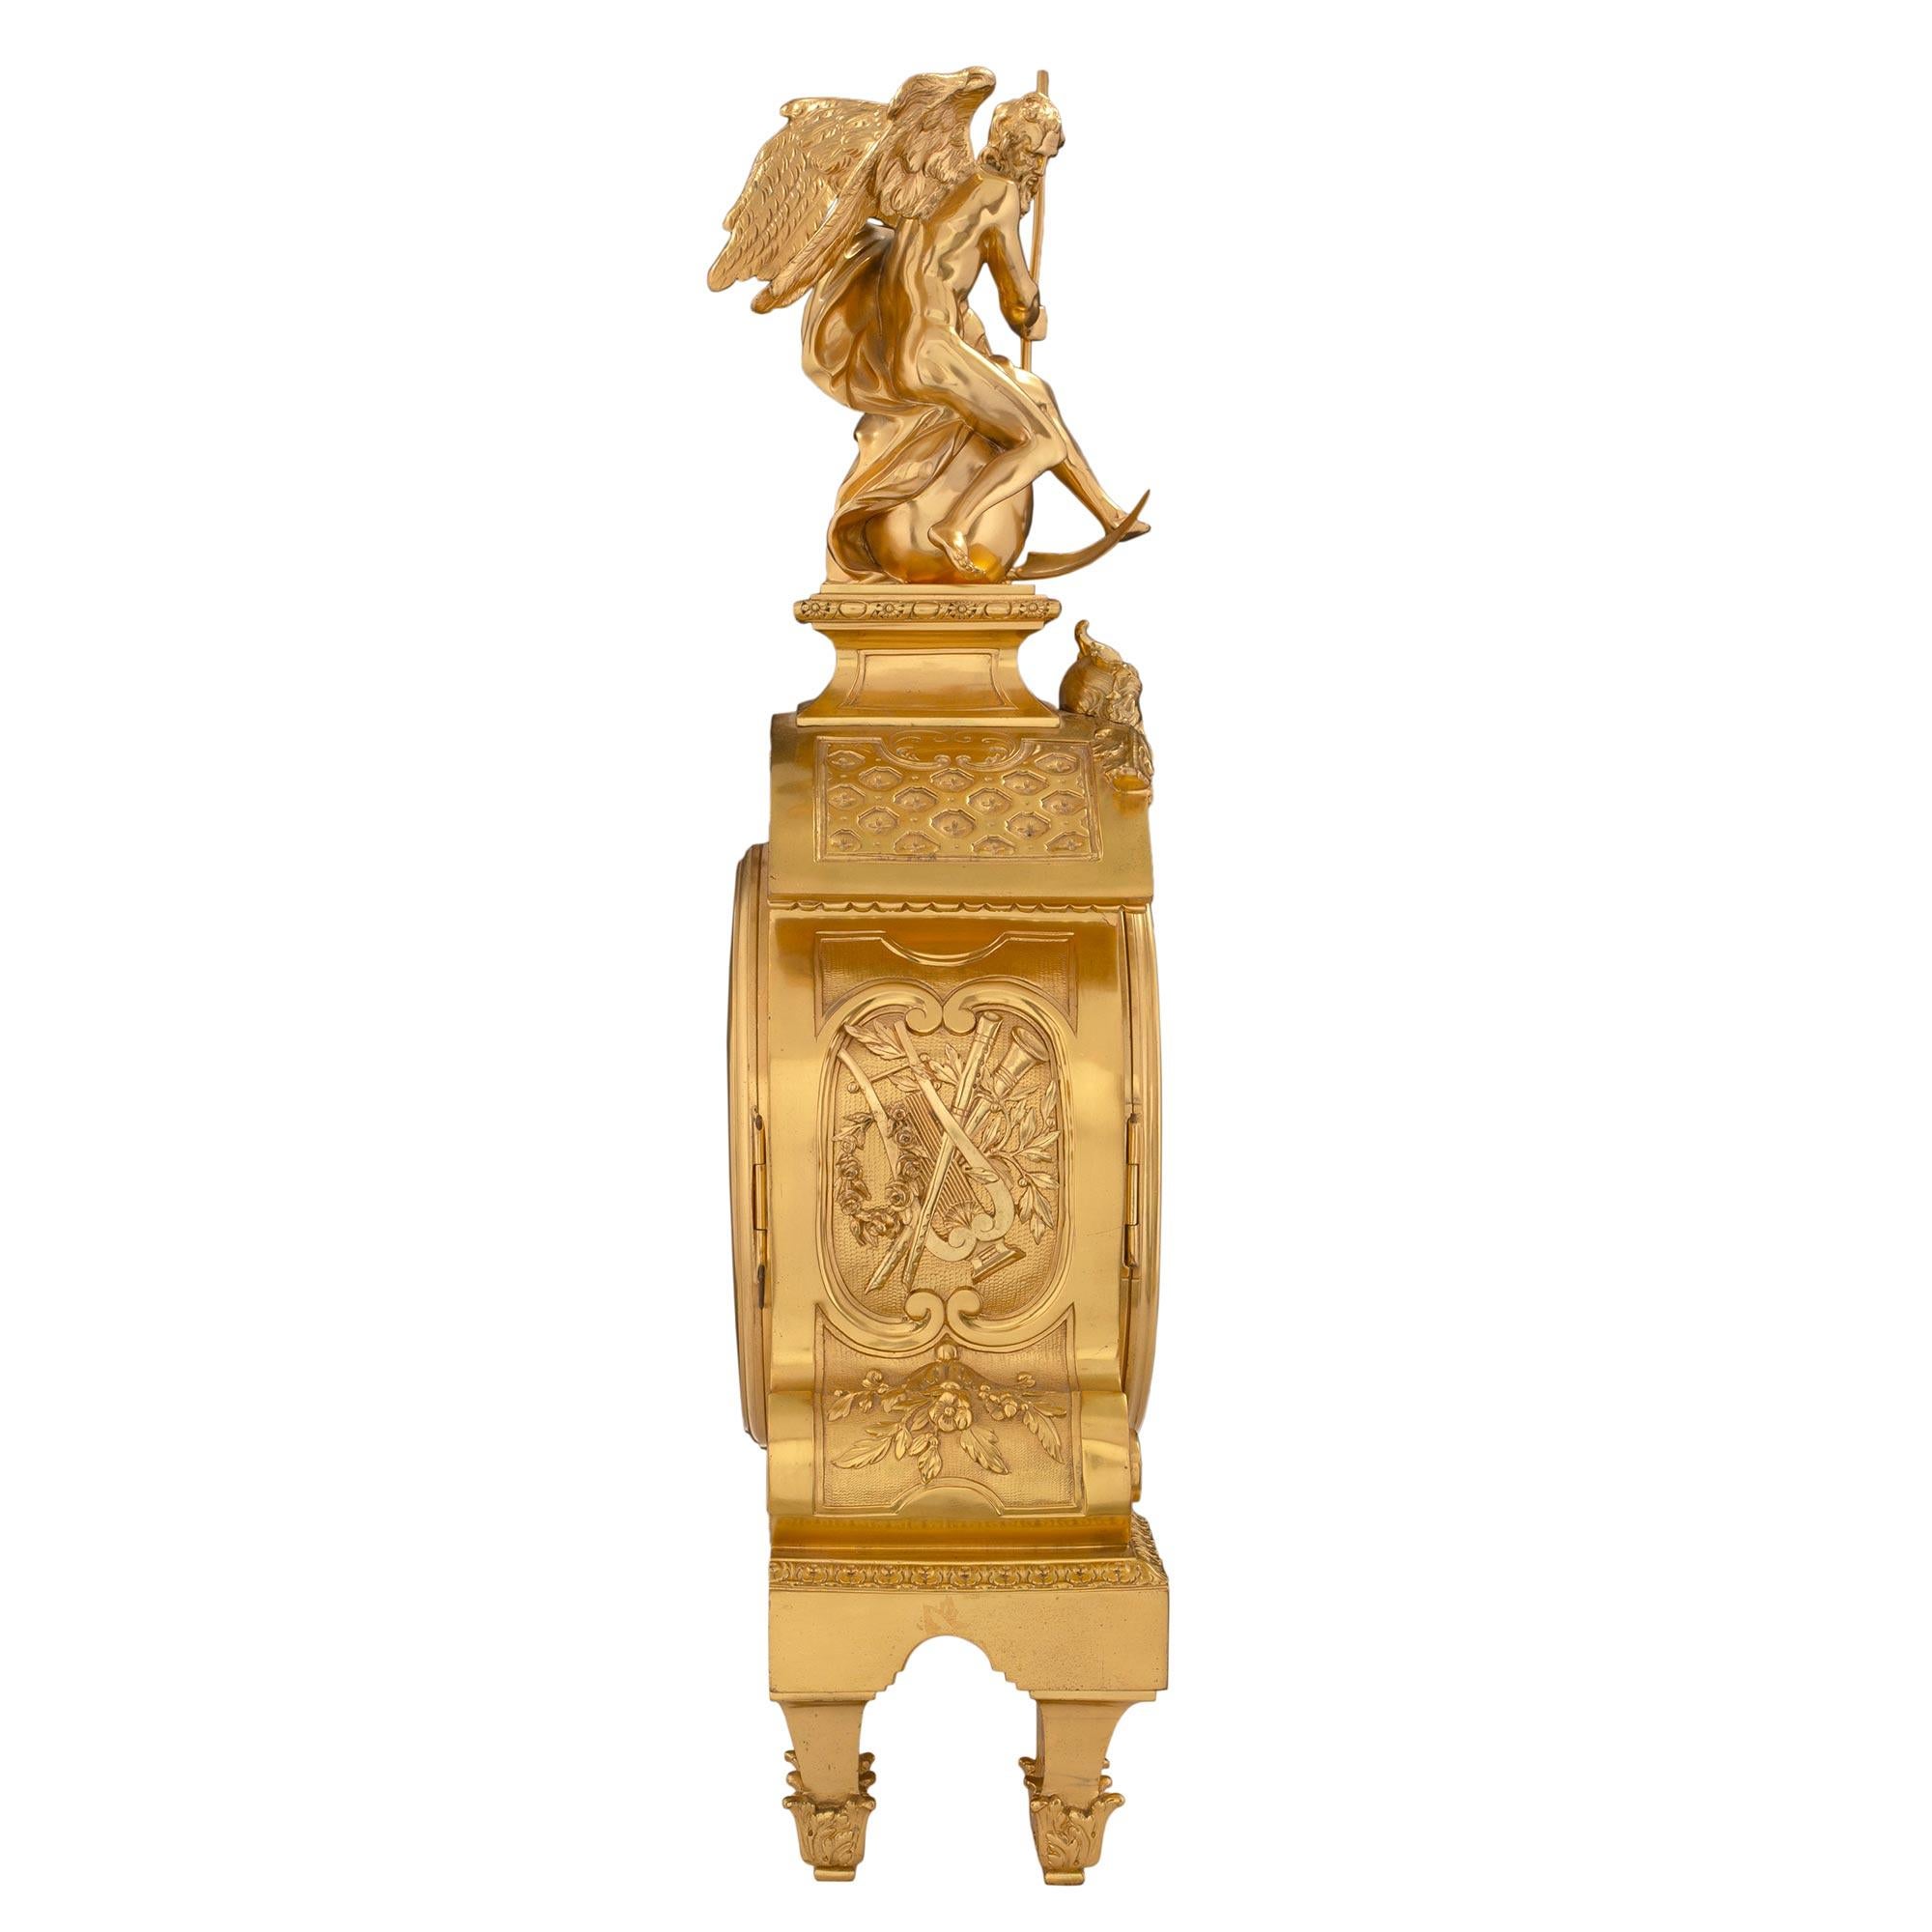 French 19th Century Louis XIV Style Ormolu Clock Stamped ‘DENIERE A PARIS” In Good Condition For Sale In West Palm Beach, FL